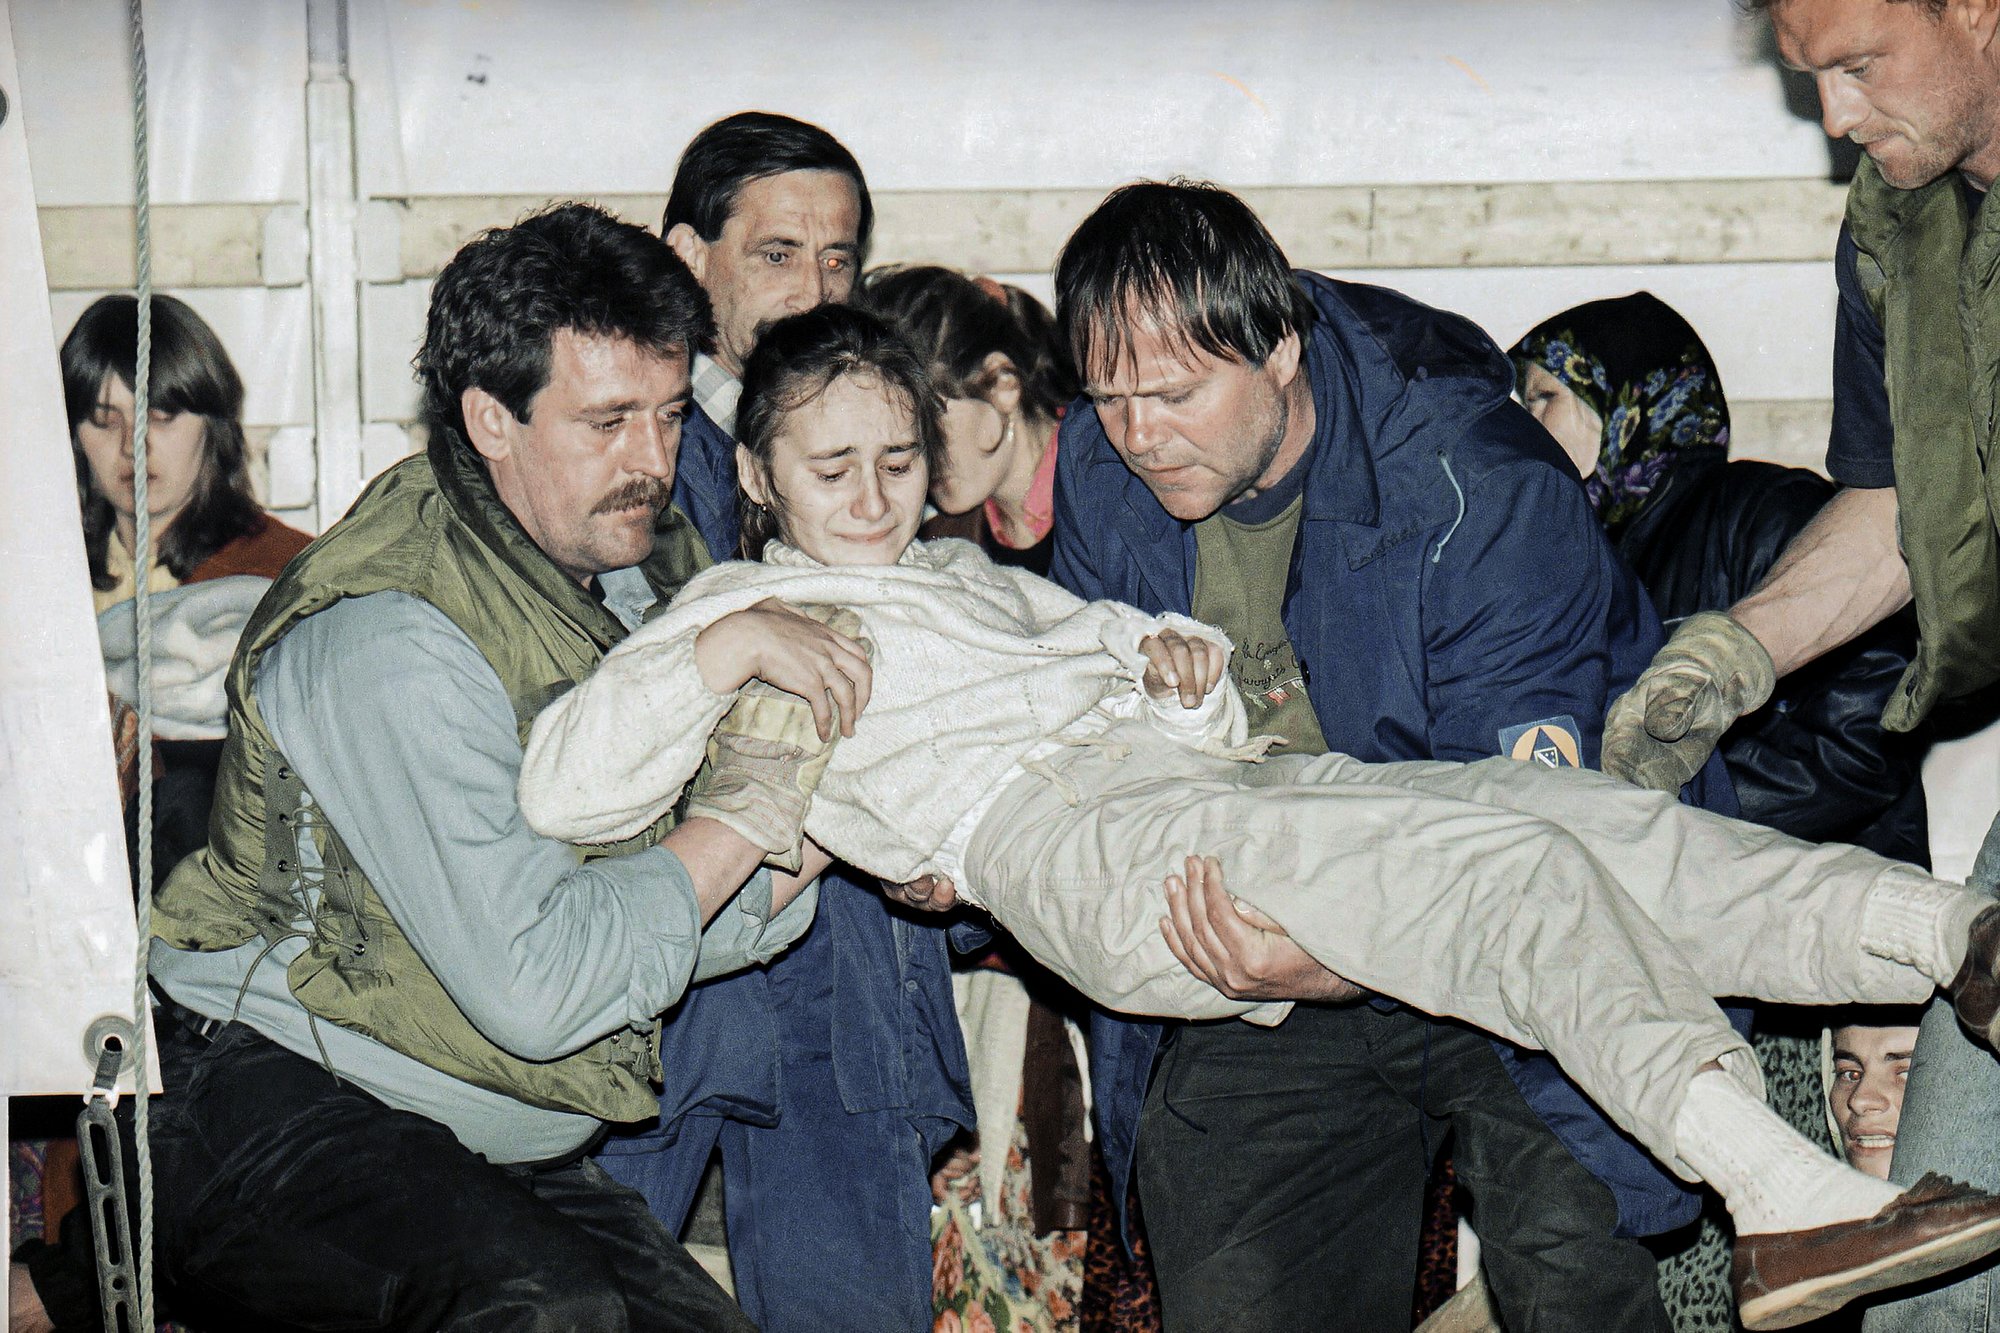 FILE- In this March 20, 1993, file picture, a wounded child form the besieged Bosnian town of Srebrenica is carried off a U.N. truck upon arriving in Tuzla, Bosnia, after a tense journey across the most contested battle lines in Bosnia.  Survivors of the genocide in the eastern Bosnian town of Srebrenica, mainly women, will on Saturday July 11, 2020, commemorate the 25th anniversary of the slaughter of their fathers and brothers, husbands and sons.  At least 8,000 mostly Muslim men and boys were chased through woods in and around Srebrenica by Serb troops in what is considered the worst carnage of civilians in Europe since World War II. The slaughter was also the only atrocity of the brutal war that has been confirmed an act of genocide. (AP Photo/Michel Euler, File)